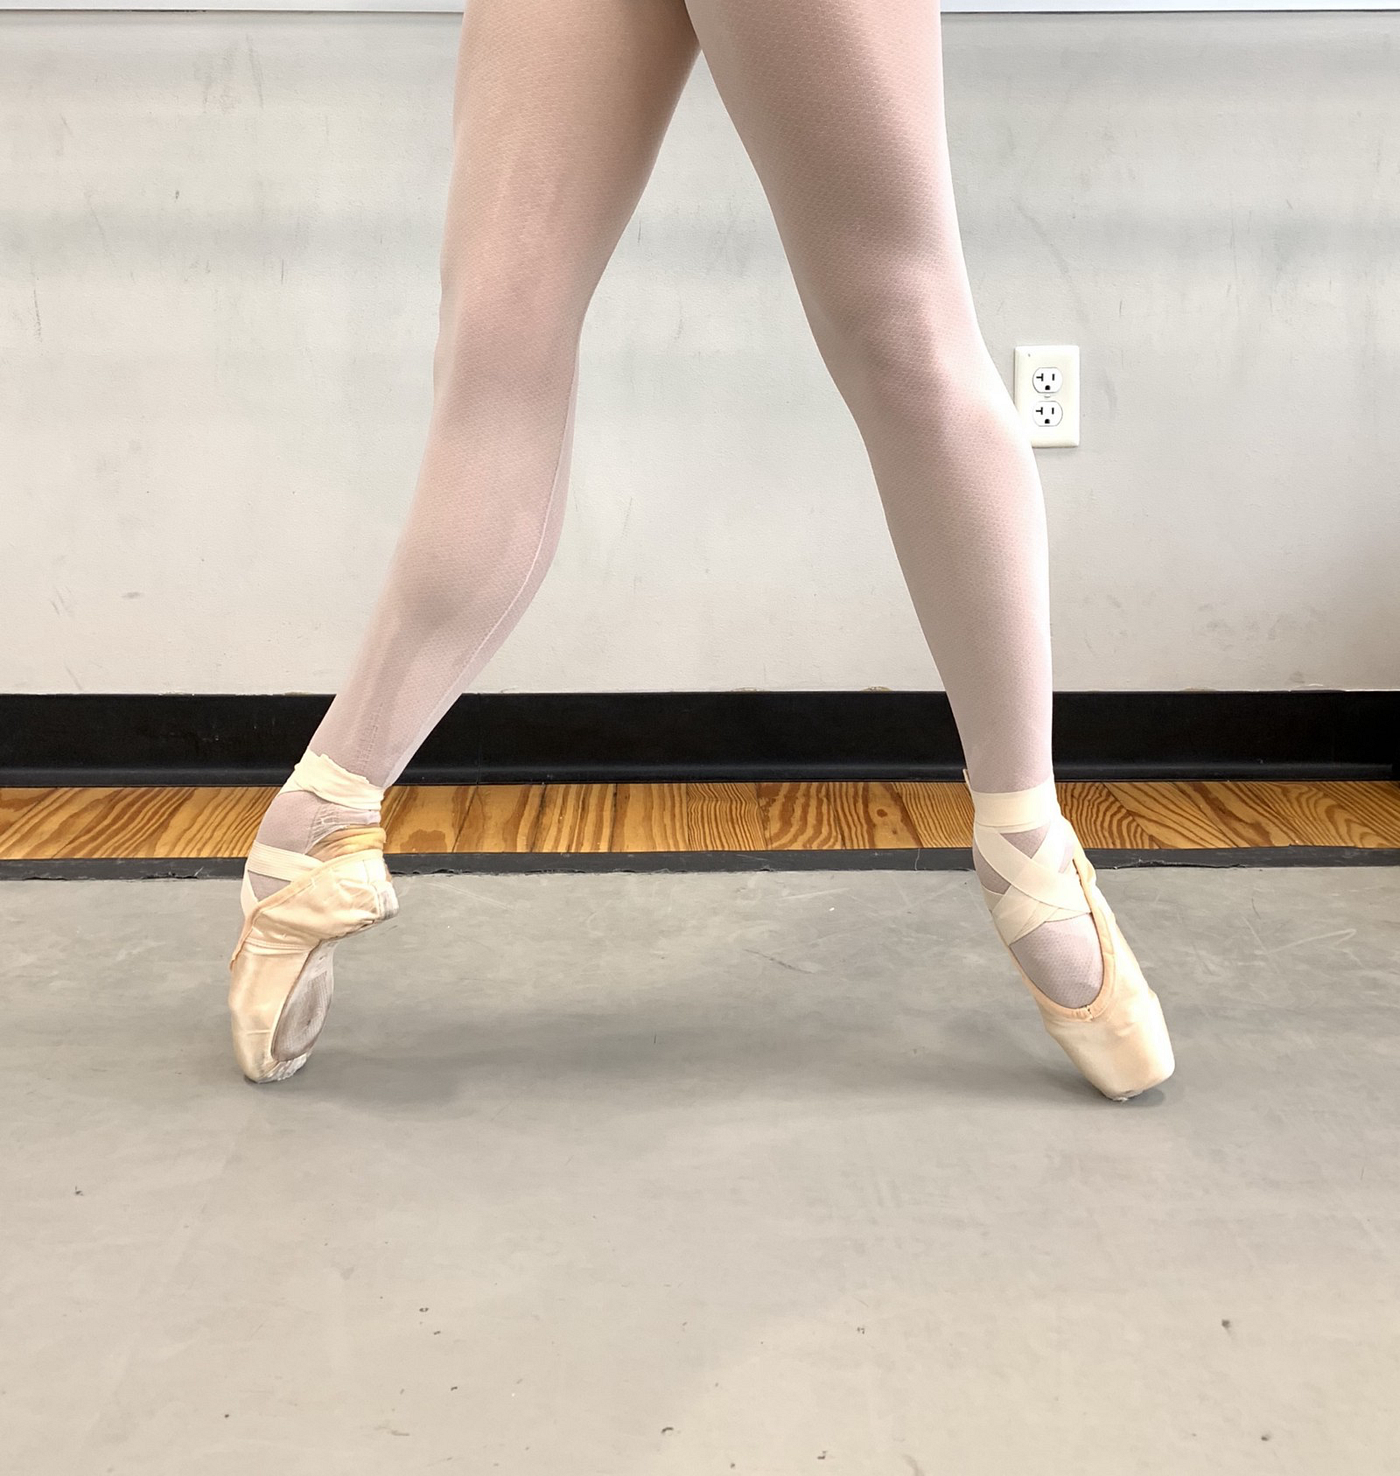 To The special shoes help ballerinas dance on their toes | by Ballet Austin | Medium